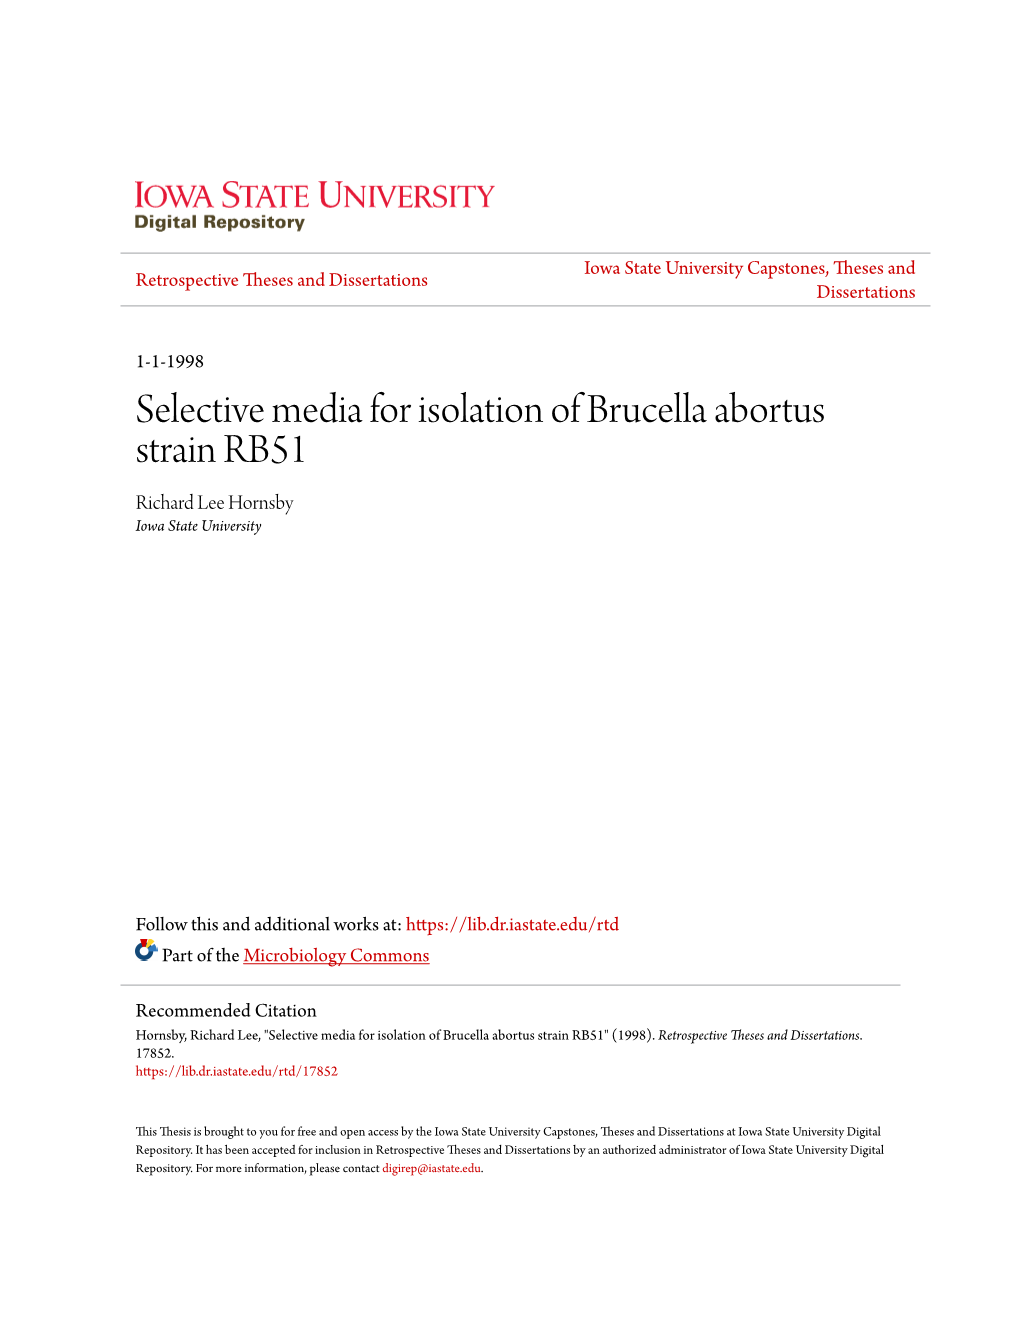 Selective Media for Isolation of Brucella Abortus Strain RB51 Richard Lee Hornsby Iowa State University